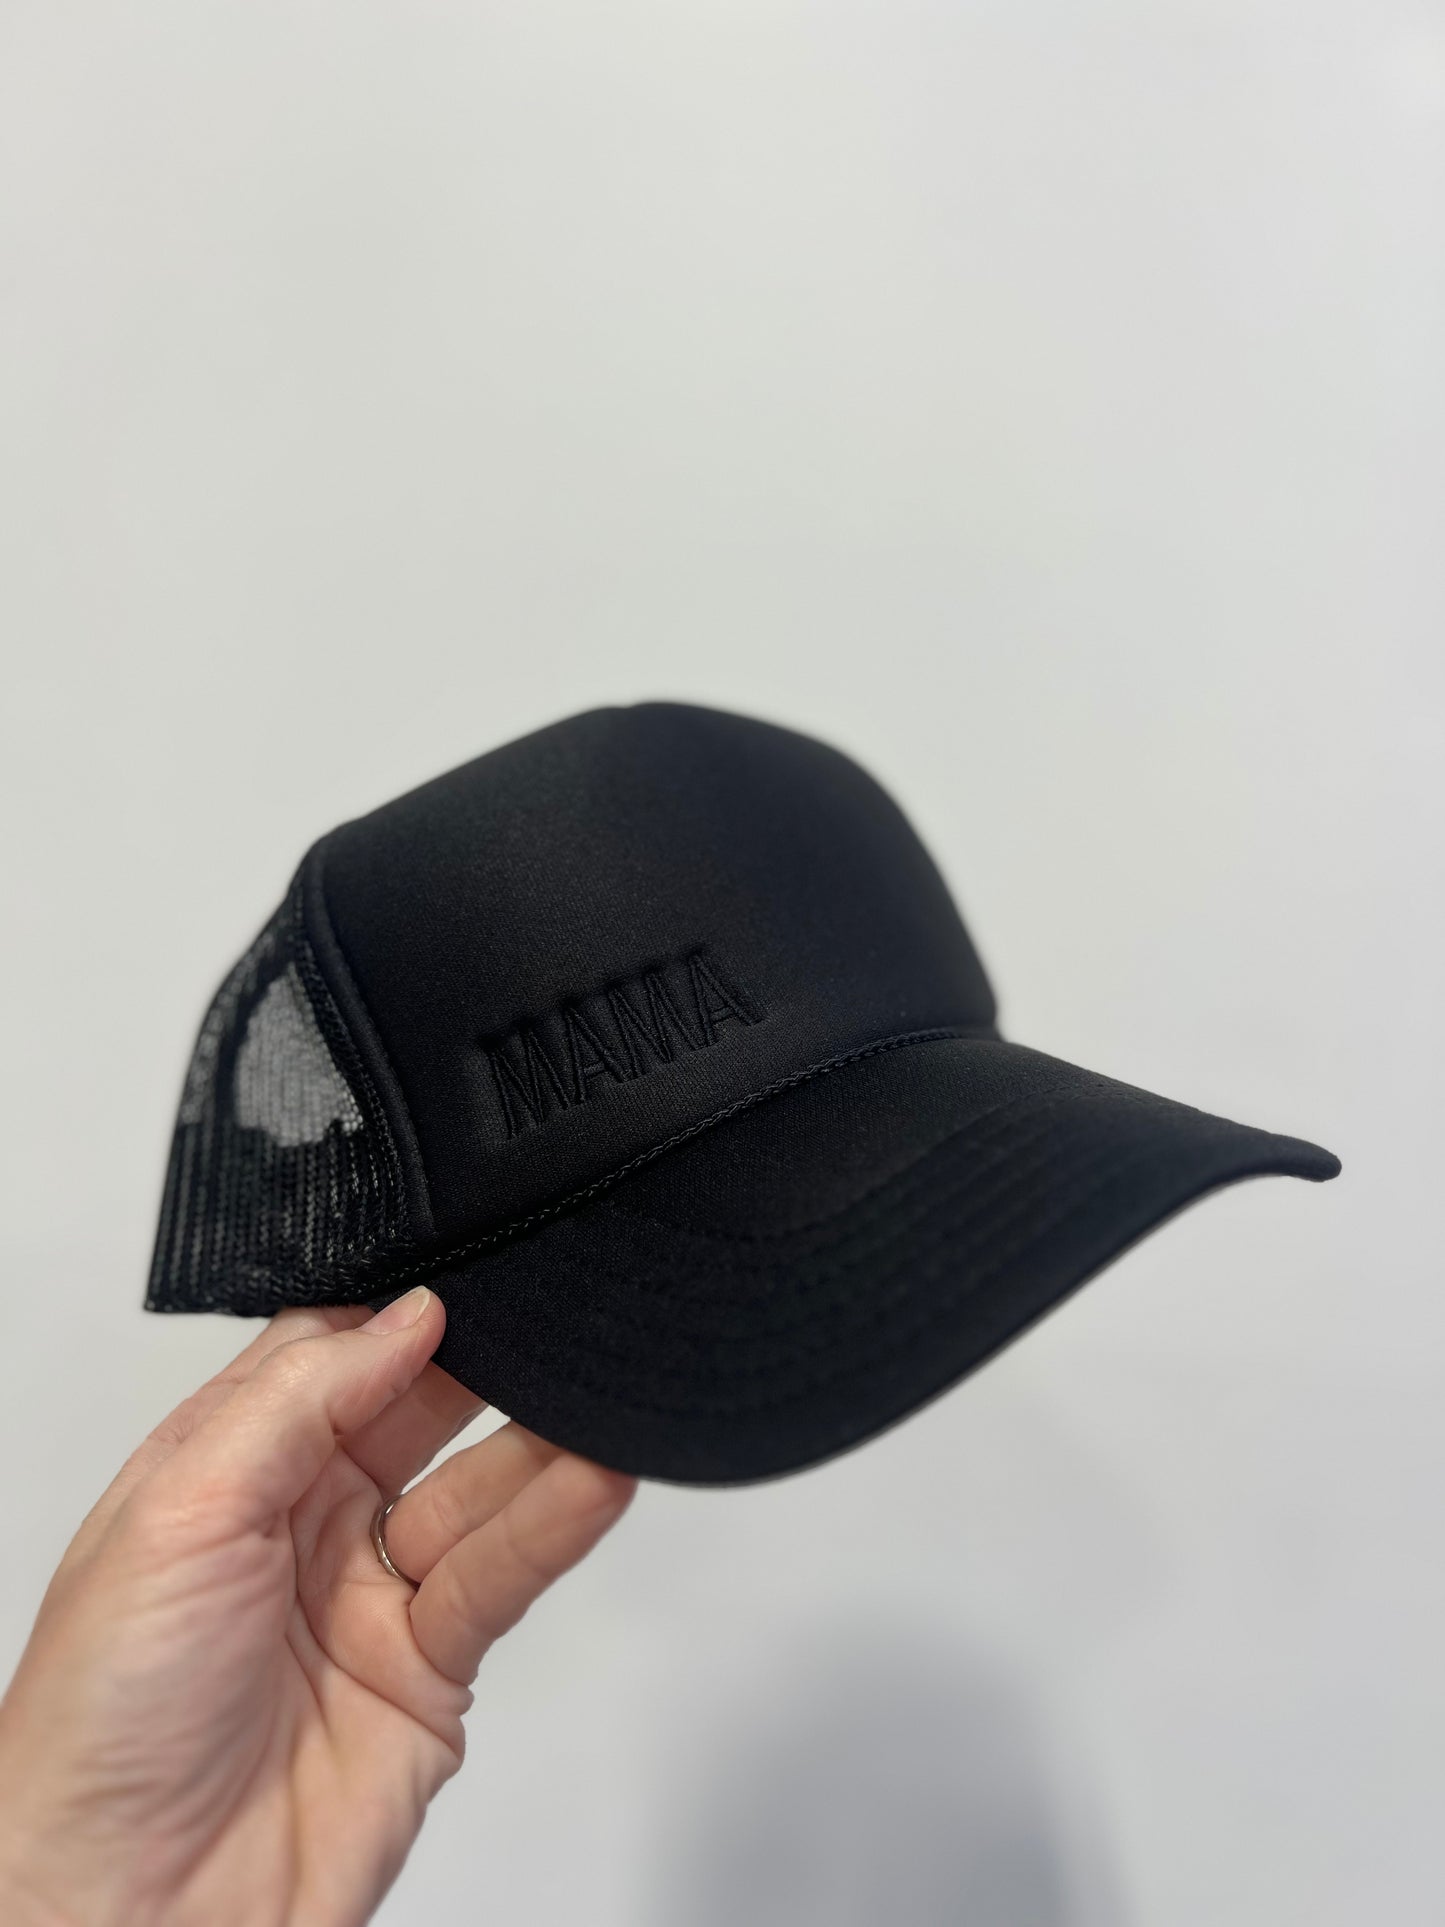 MAMA Trucker Hat (see drop down for more colors)